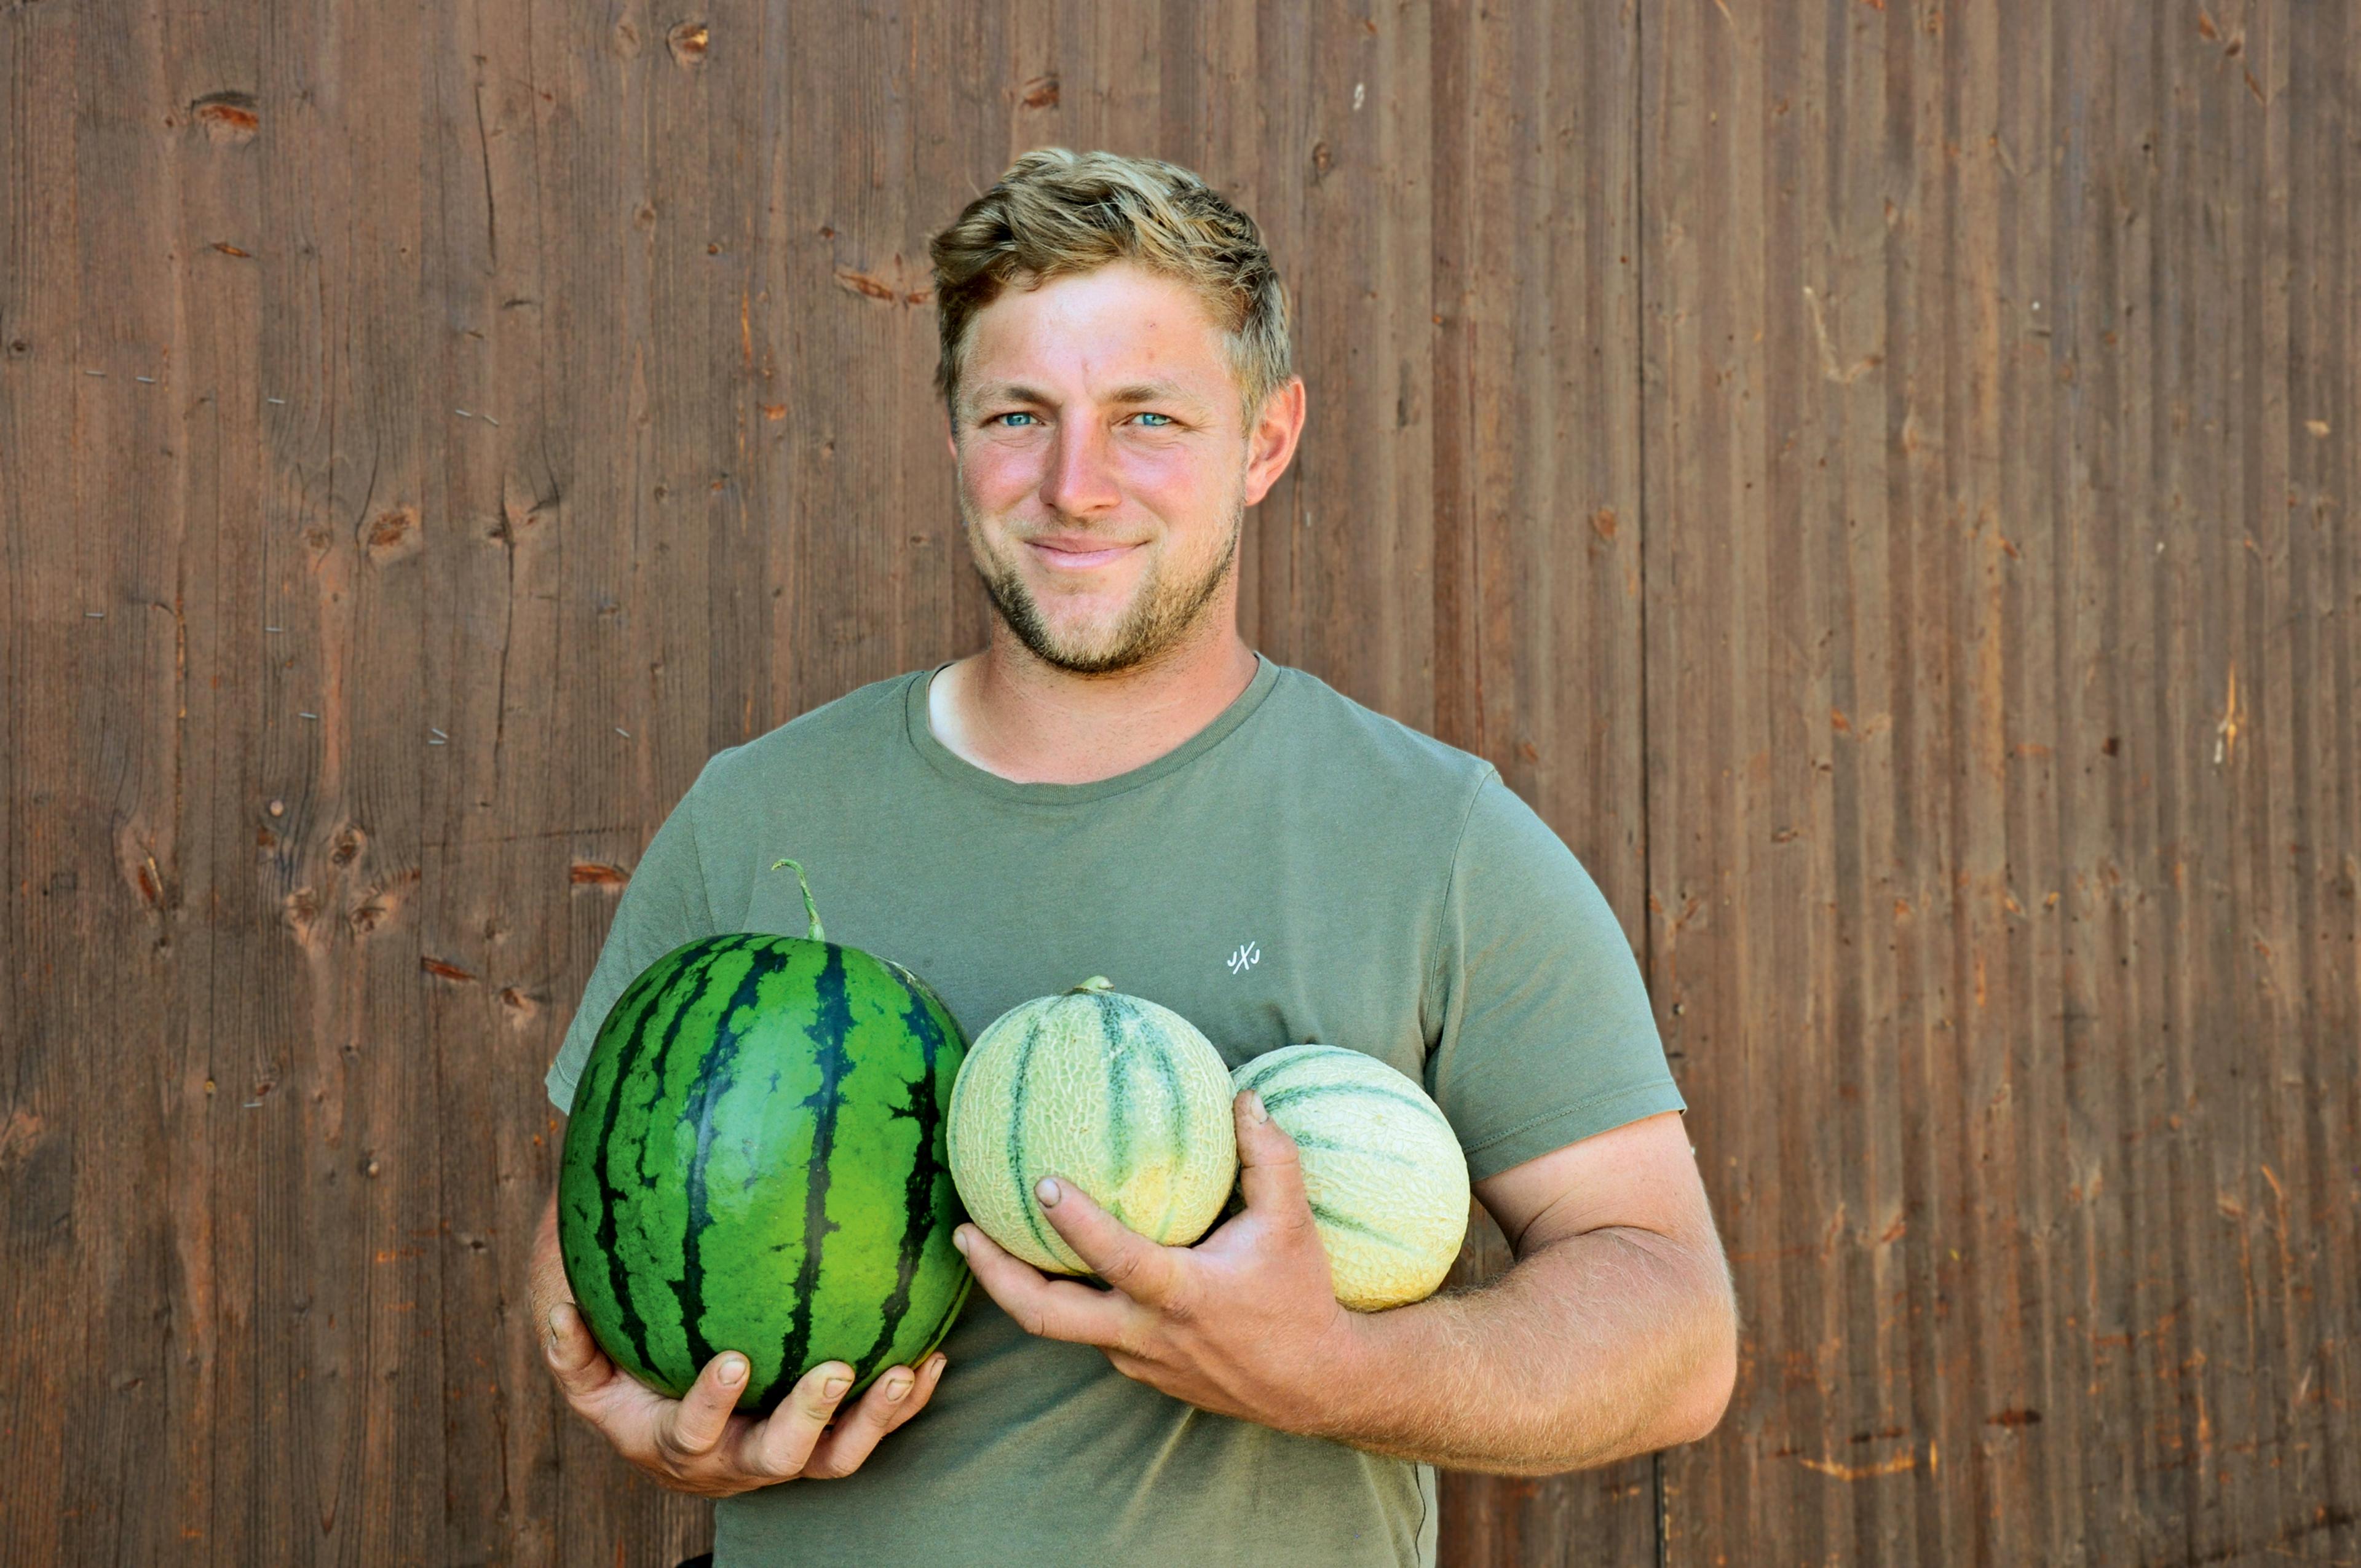 Daniel Wilhalm with  water and honeydew melons in his hands